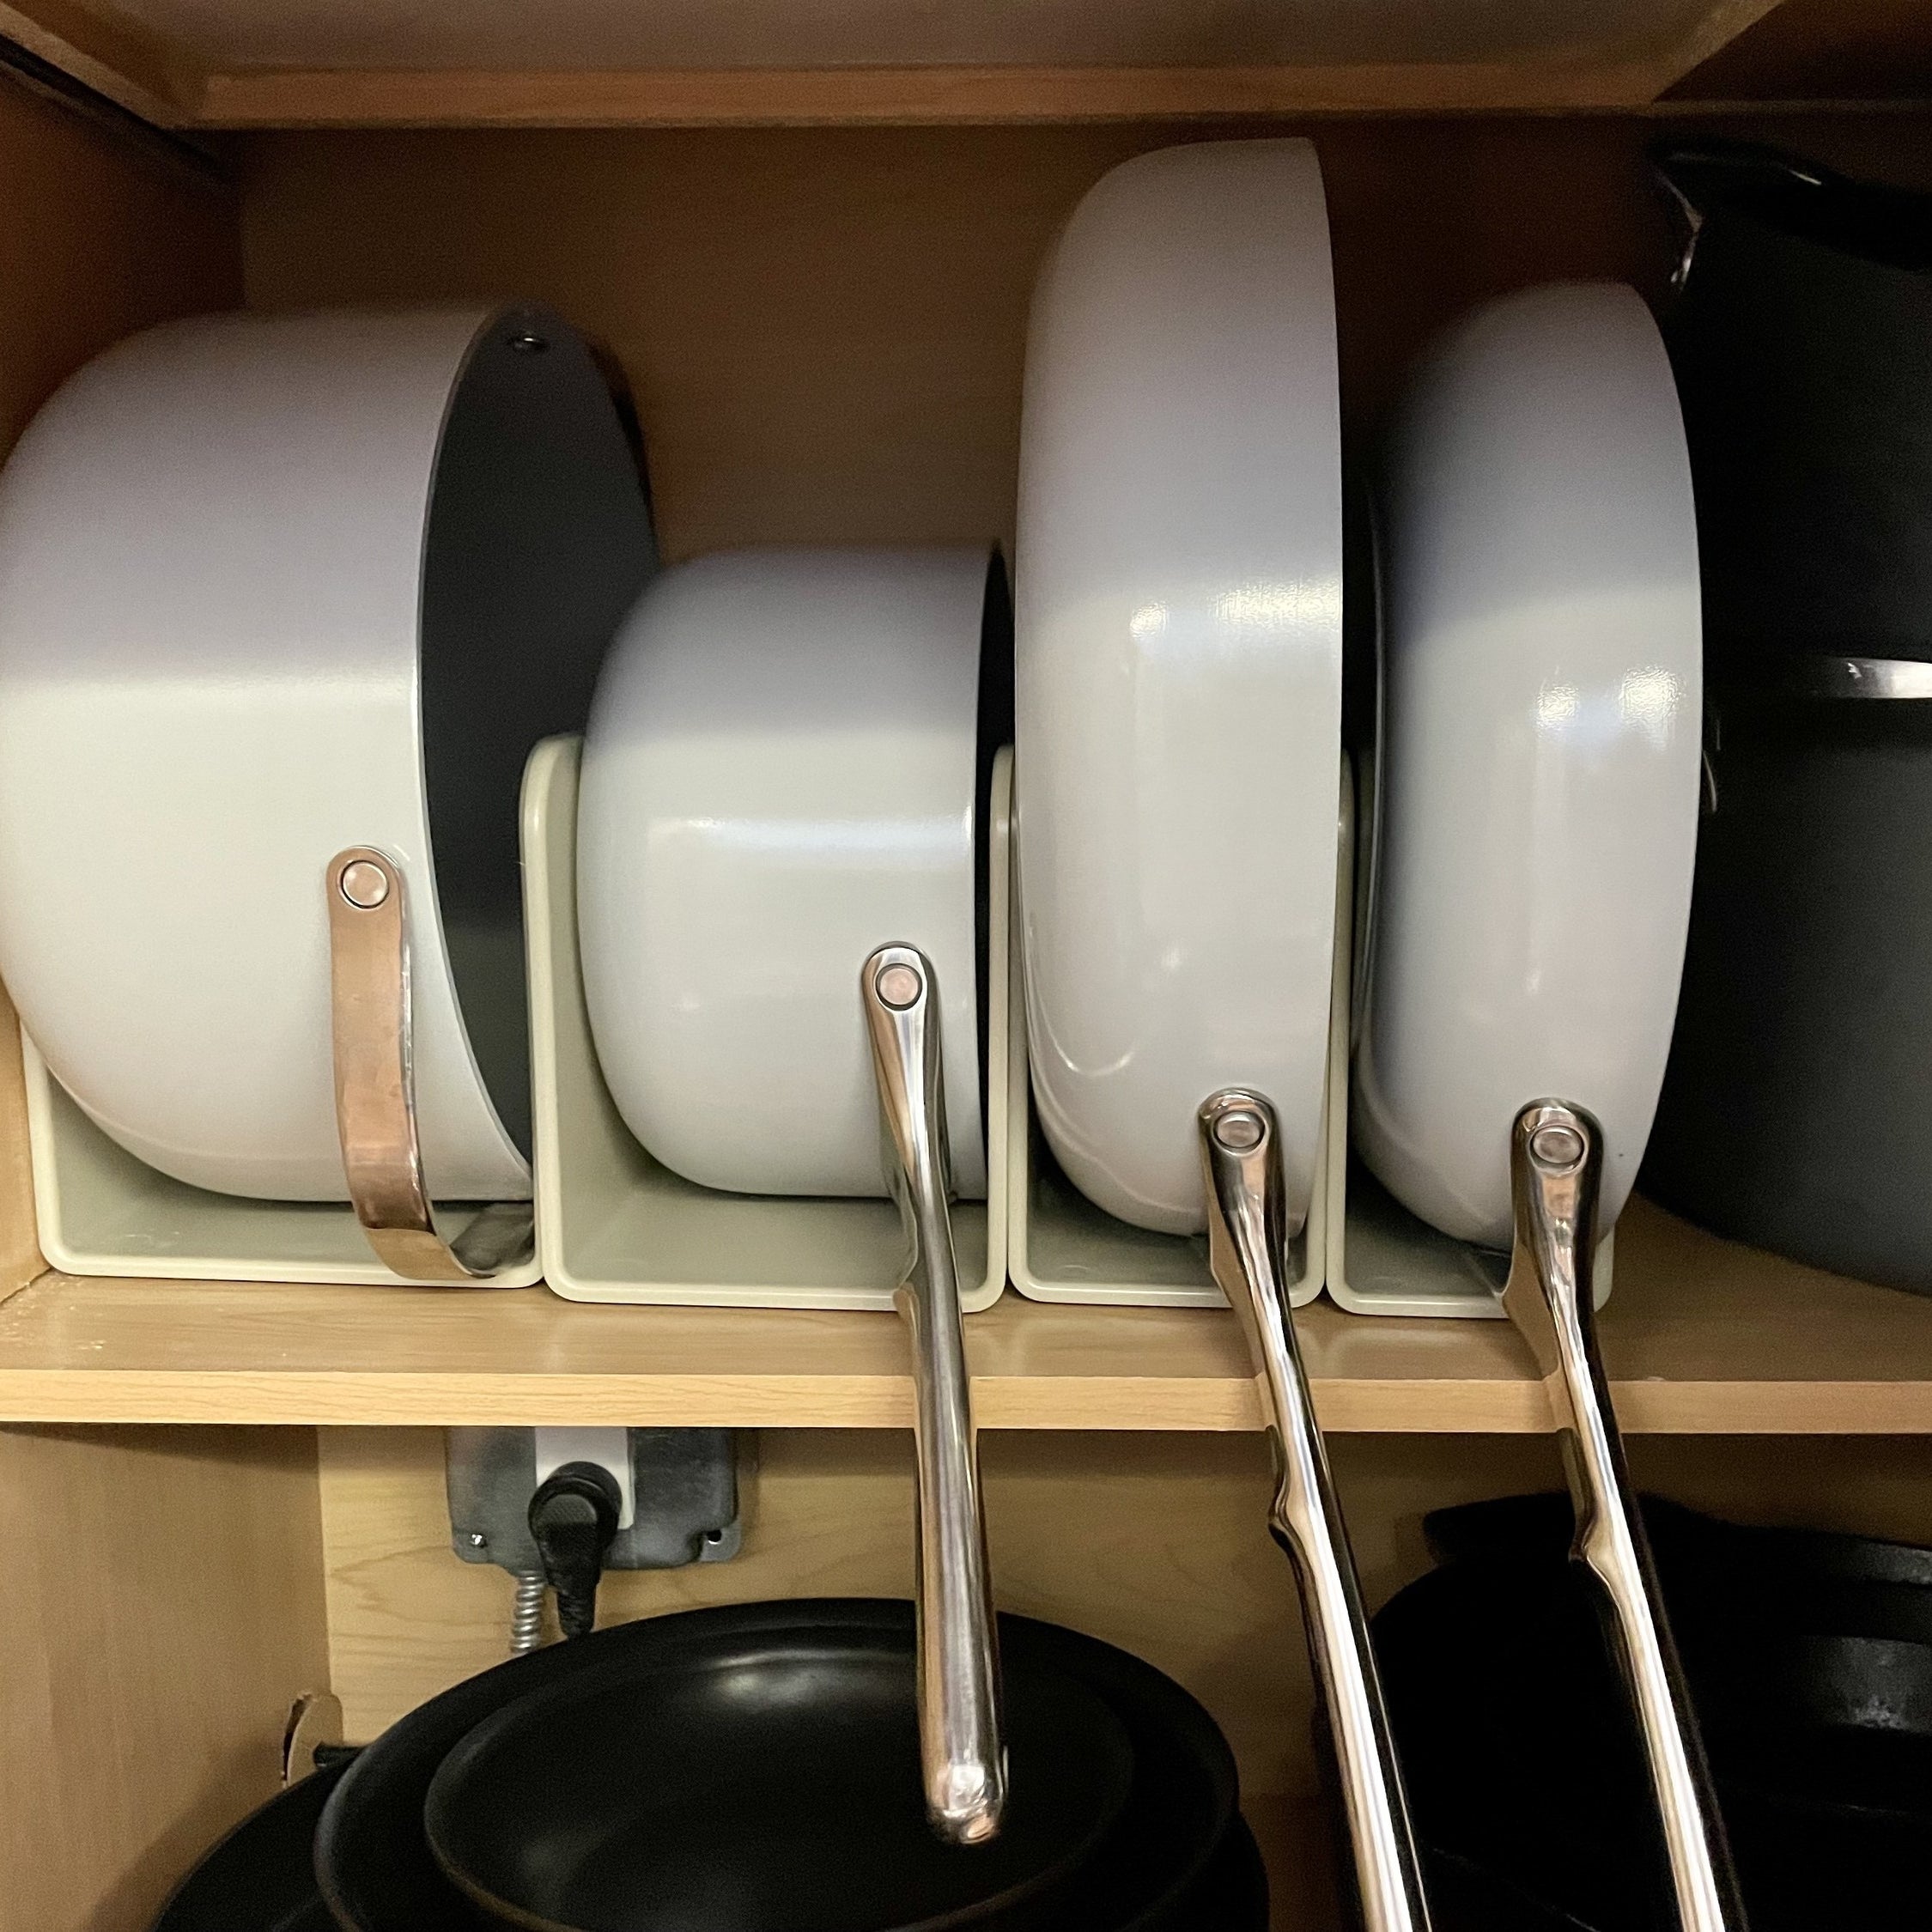 Does Caraway Cookware Actually Live Up to the Hype? A Mom's Review